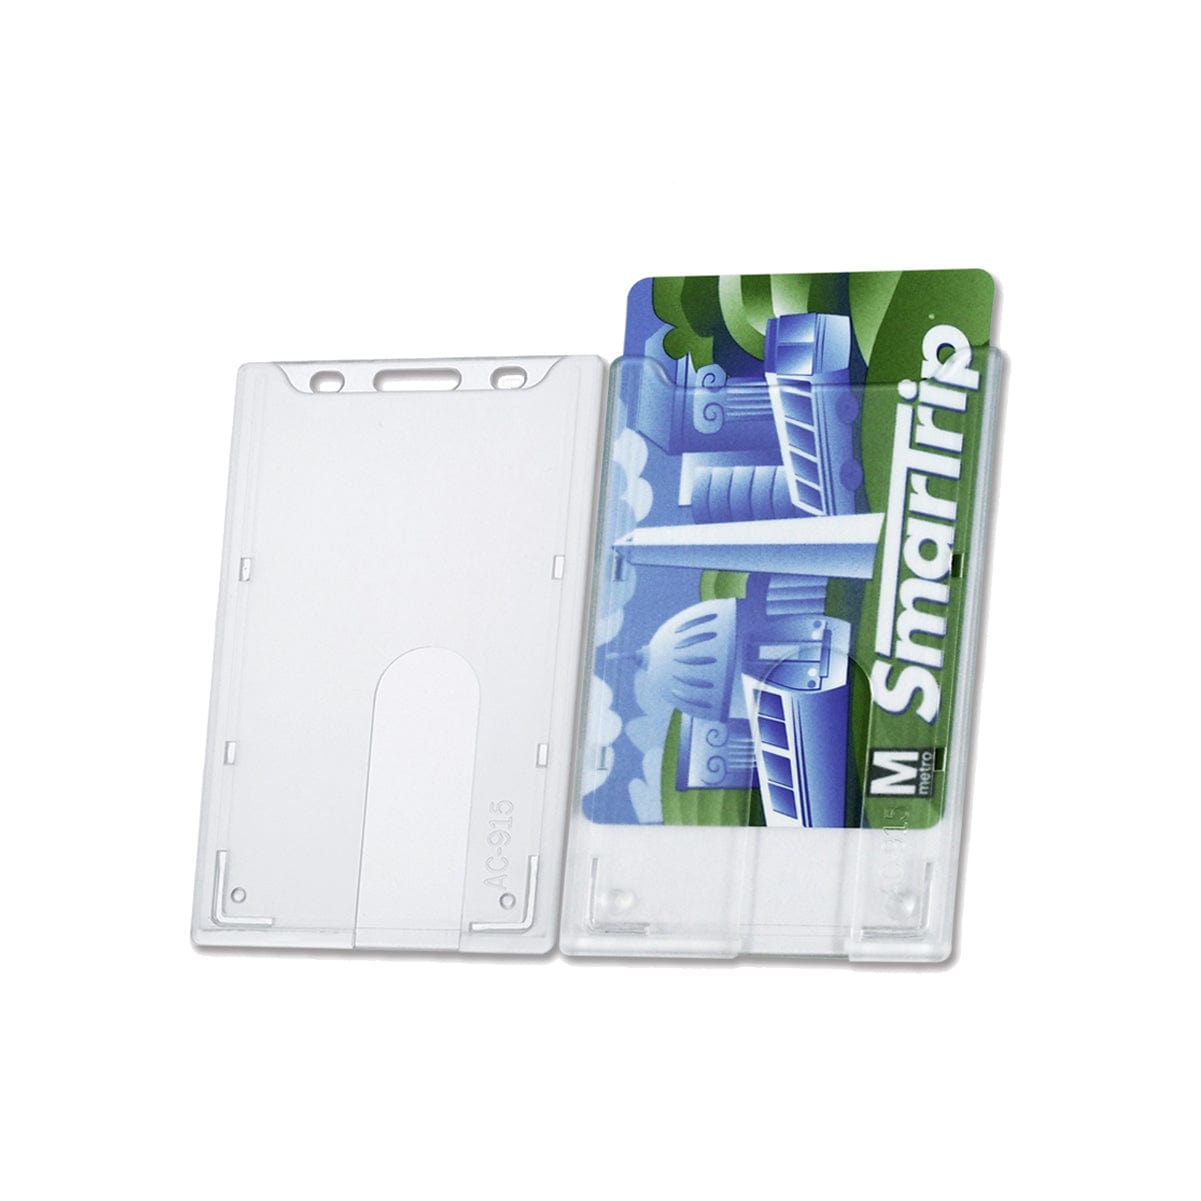 A SmarTrip card partially inserted into a Top Load Rigid Clear Vertical Badge Holder (AC-915), featuring a cityscape and green landscape design on the card.